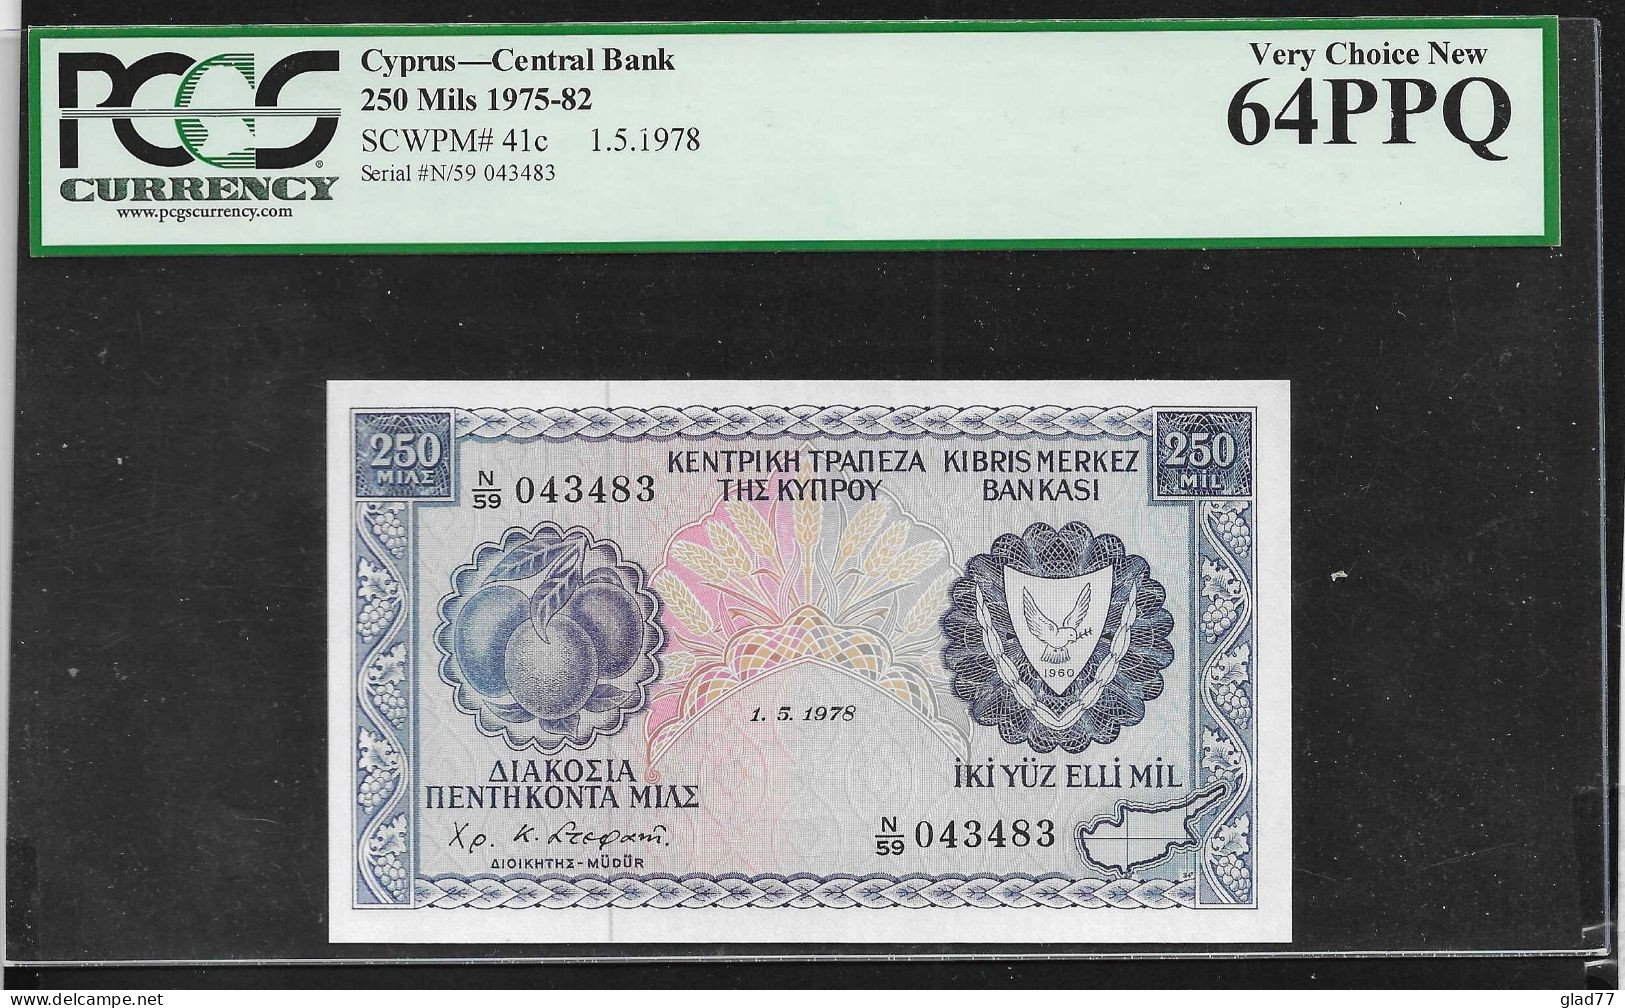 Cyprus  250 MIL 1.5.1978 PCGS Banknote 64 PPQ (Perfect Paper Quality) Very Choice UNC! Rare!! - Cyprus